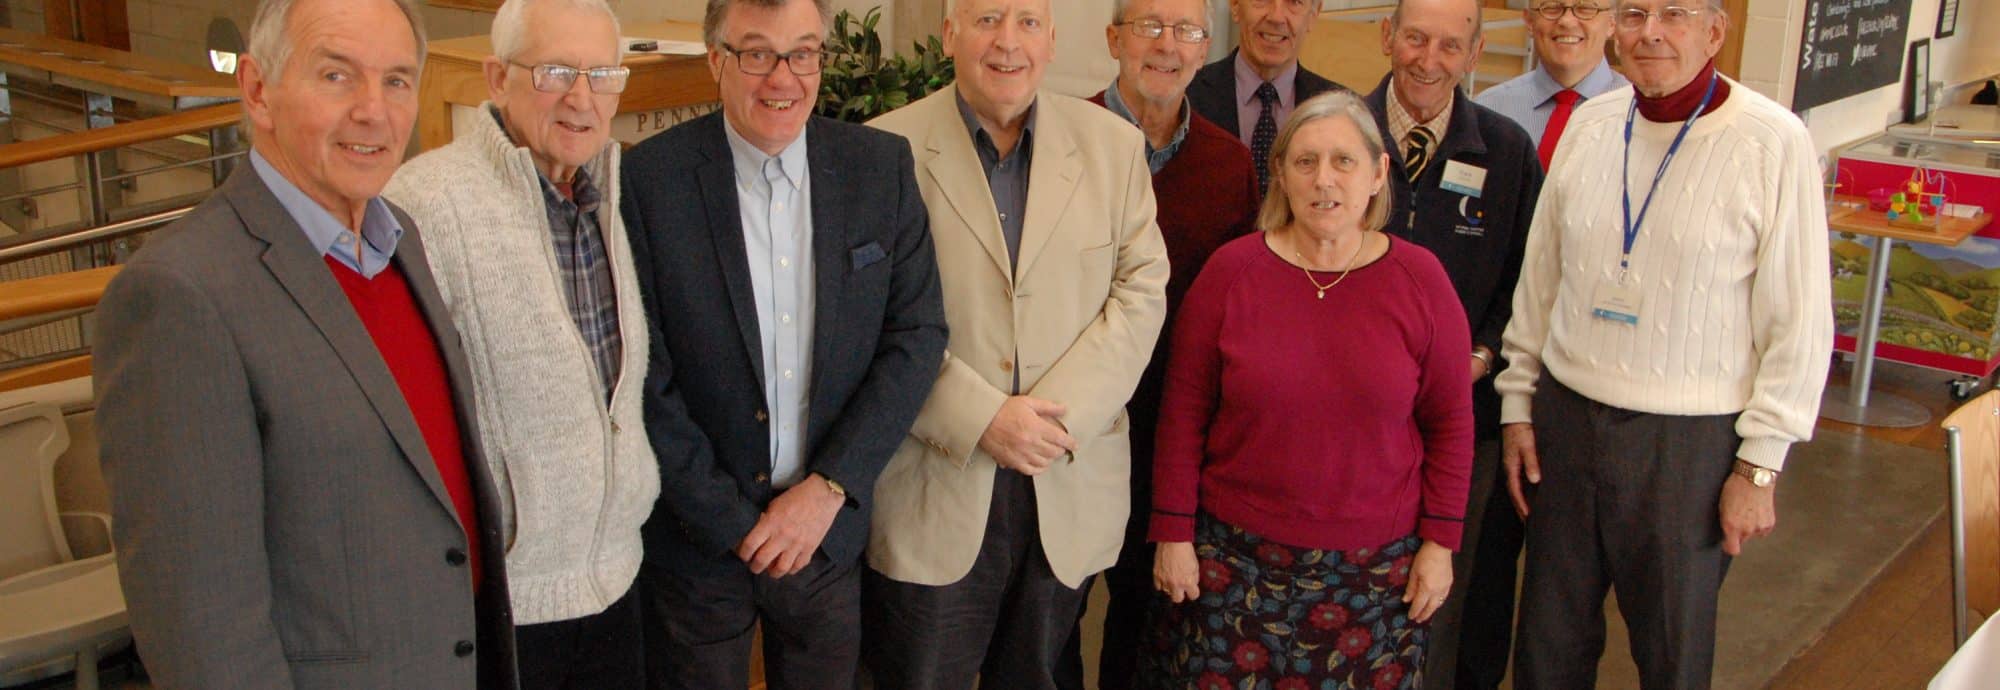 Nine volunteers celebrate reaching five or ten years of voluntary service, pictured with the Museum's director Richard Doughty.